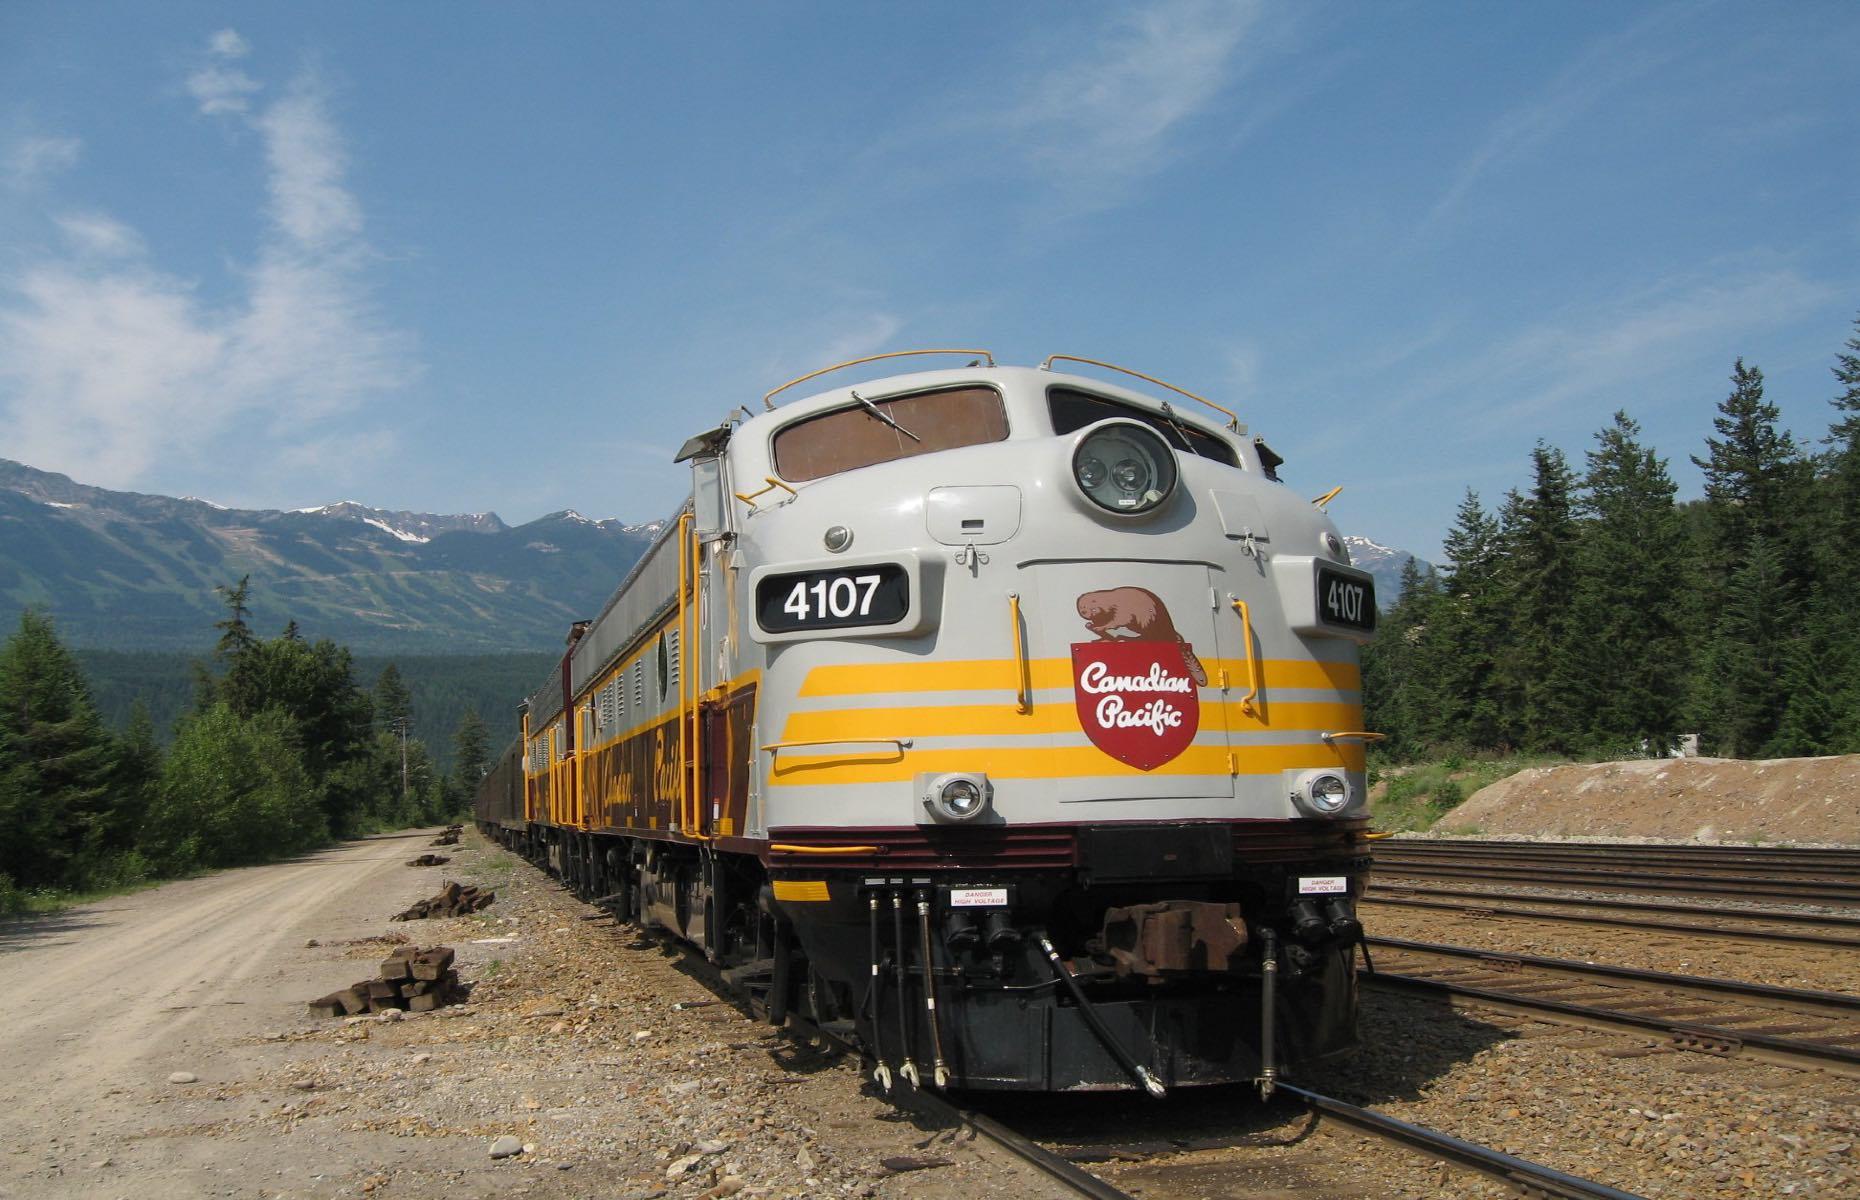 <p>With vintage-style carriages (some dating back to the 1950s), the <a href="https://www.royalcanadianpacific.com">Royal Canadian Pacific</a> is one of the most glamorous – and nostalgic – ways to discover the Canadian Rockies in Alberta and British Columbia. Offering three- and four-night trips, this superior train passes through jaw-dropping scenery and landmarks, such as the National Parks of Banff and Waterton Lakes. As the trains stop overnight, there’s a chance to drink in dramatic scenery over dinner and cocktails.</p>